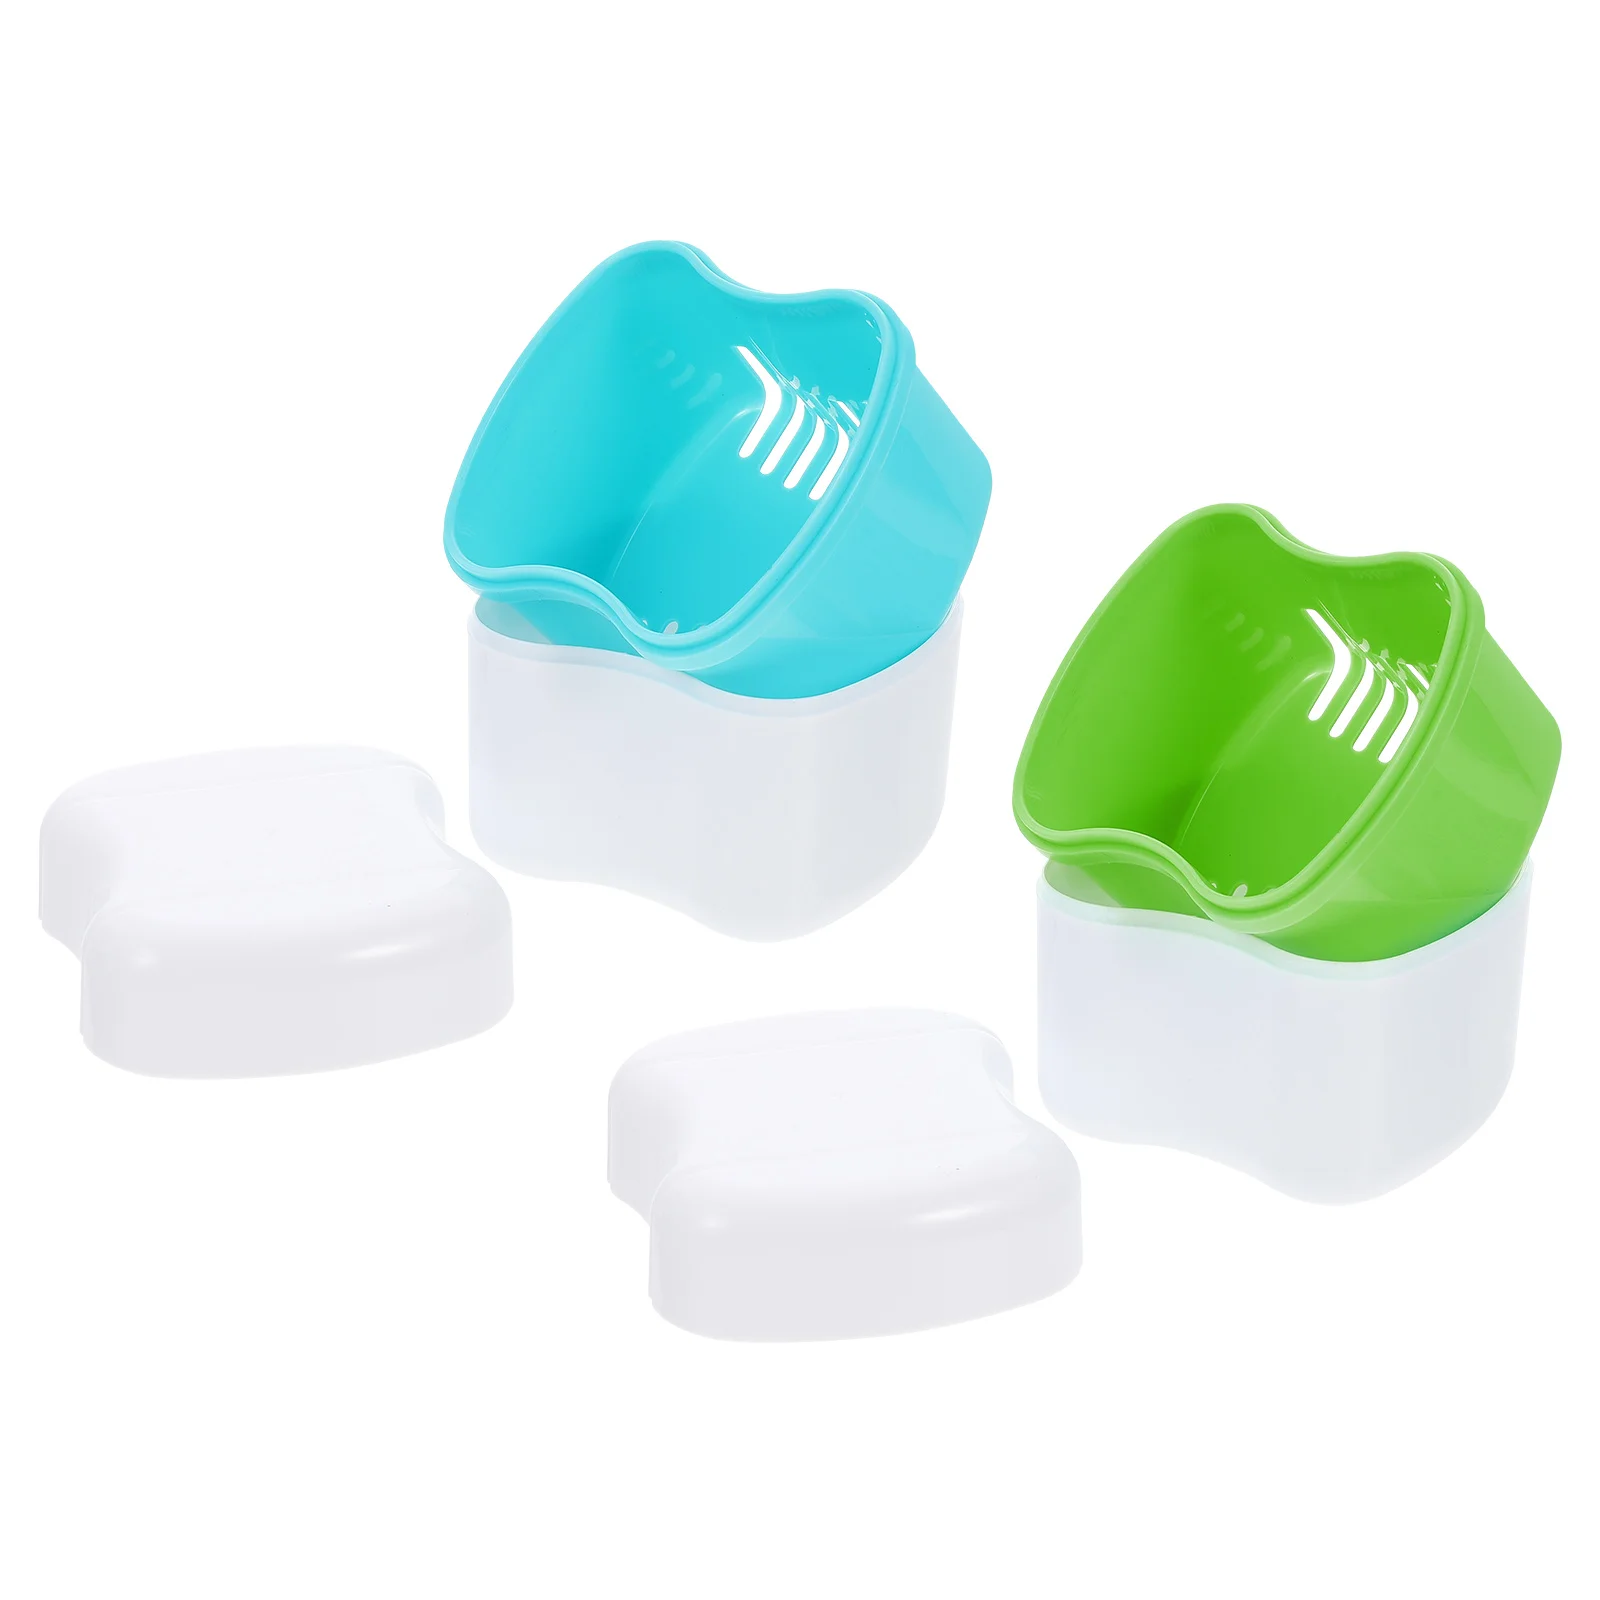 

2 Pcs Denture Storage Box Retainer Cases Cleaning Cup Container Pp Cleaner Containers Travel